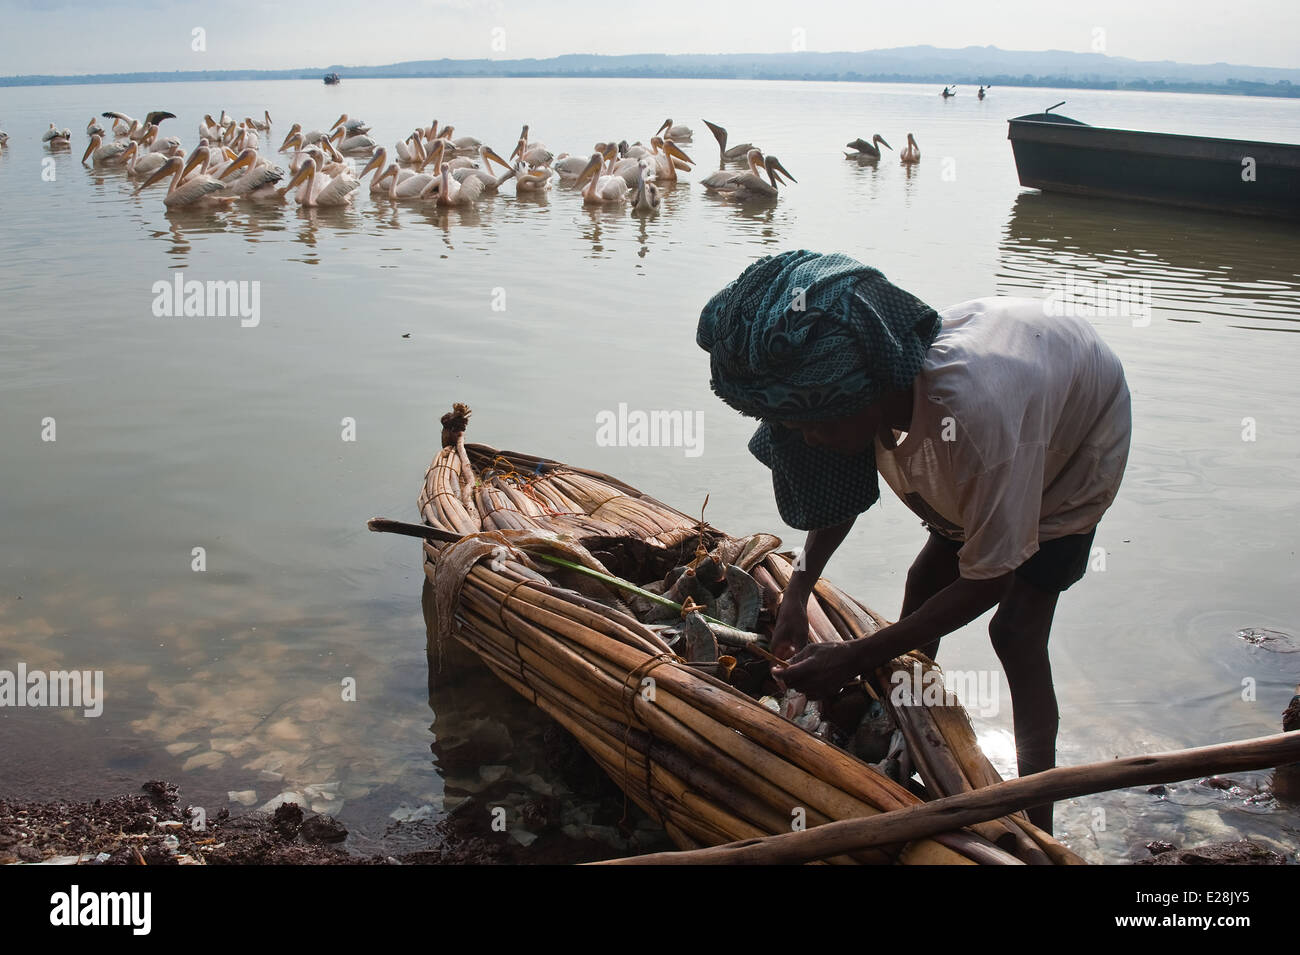 Fisherman coming back from fishing on a papyrus boat. In the background, pelicans ( Ethiopia) Stock Photo